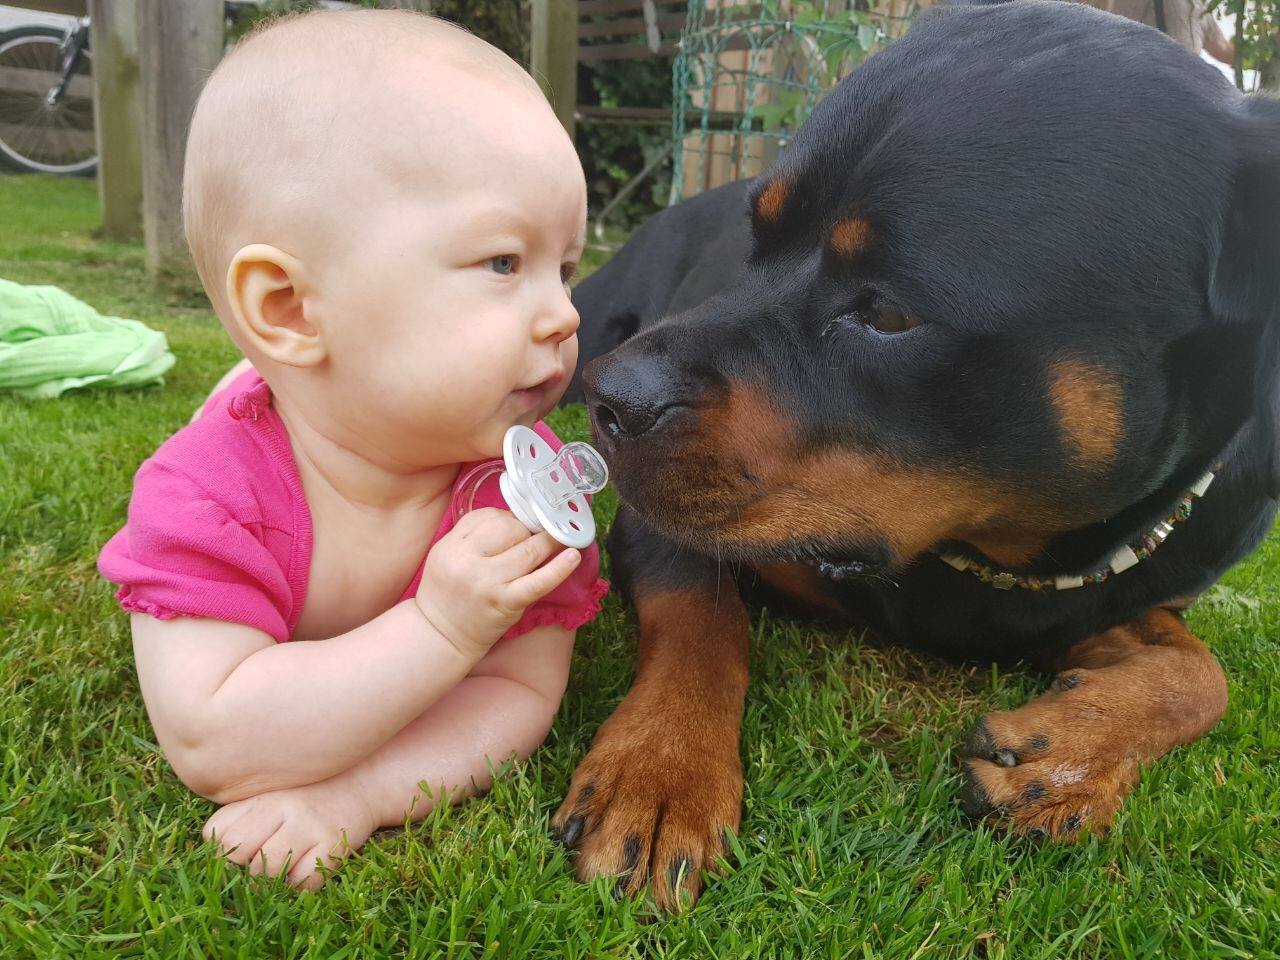 A Rottweiler lying on the grass next to a baby holding her pacifier